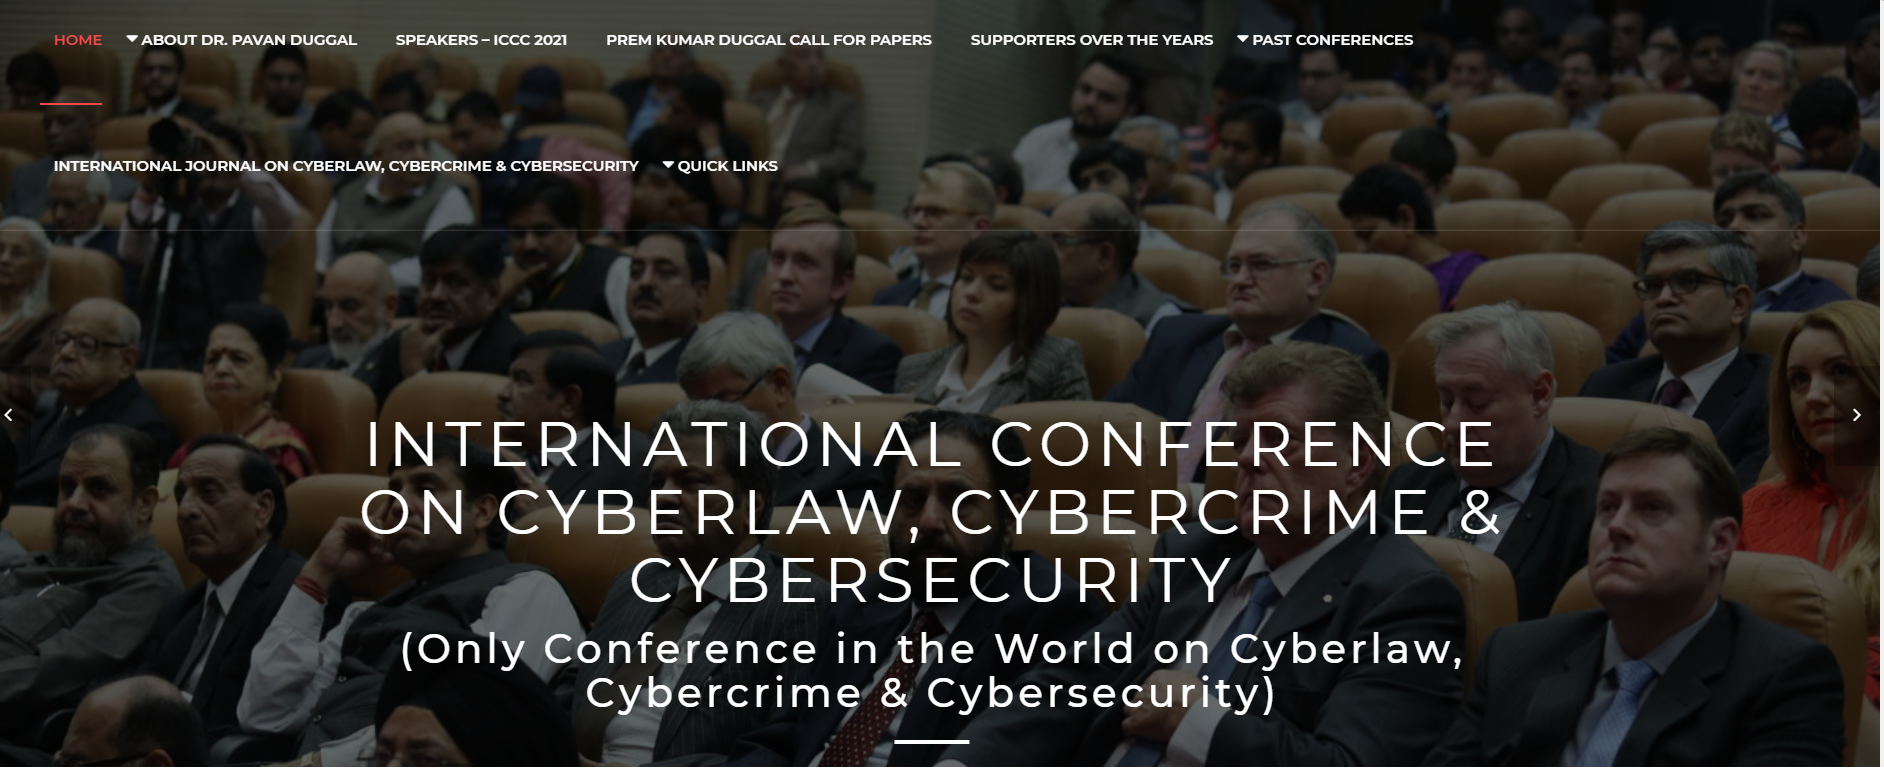 International Conference on Cyberlaw, Cybercrime & Cybersecurity